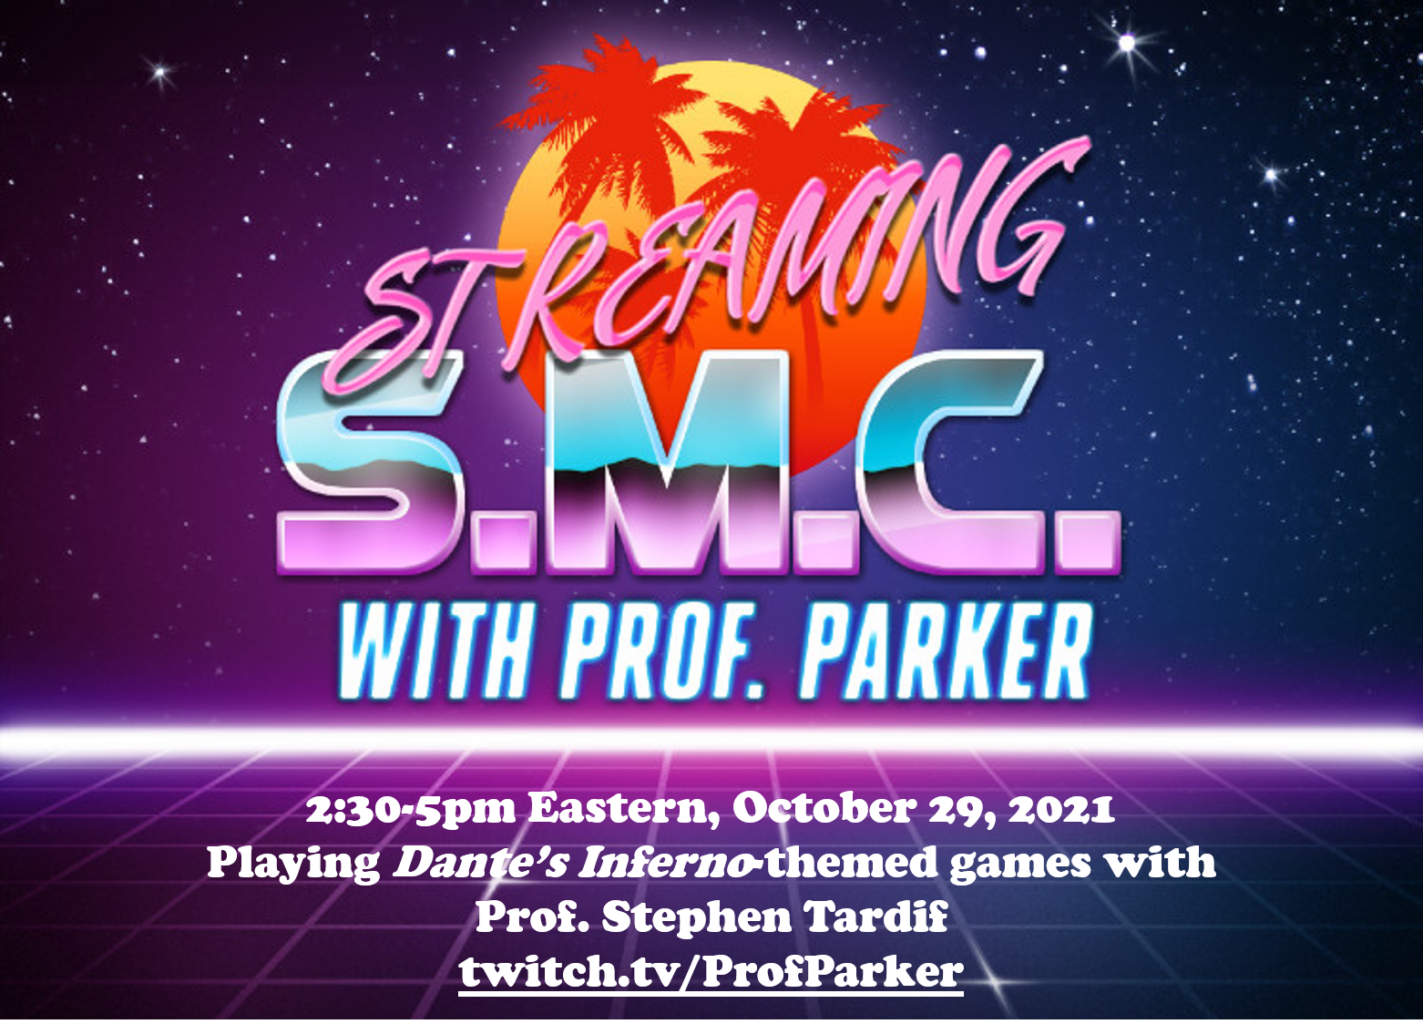 An info card for Streaming SMC with Prof. Parker advertising a Dante's Inferno-inspired game event Oct. 29 at 2:30 p.m. featuring prof Stephen Tardif